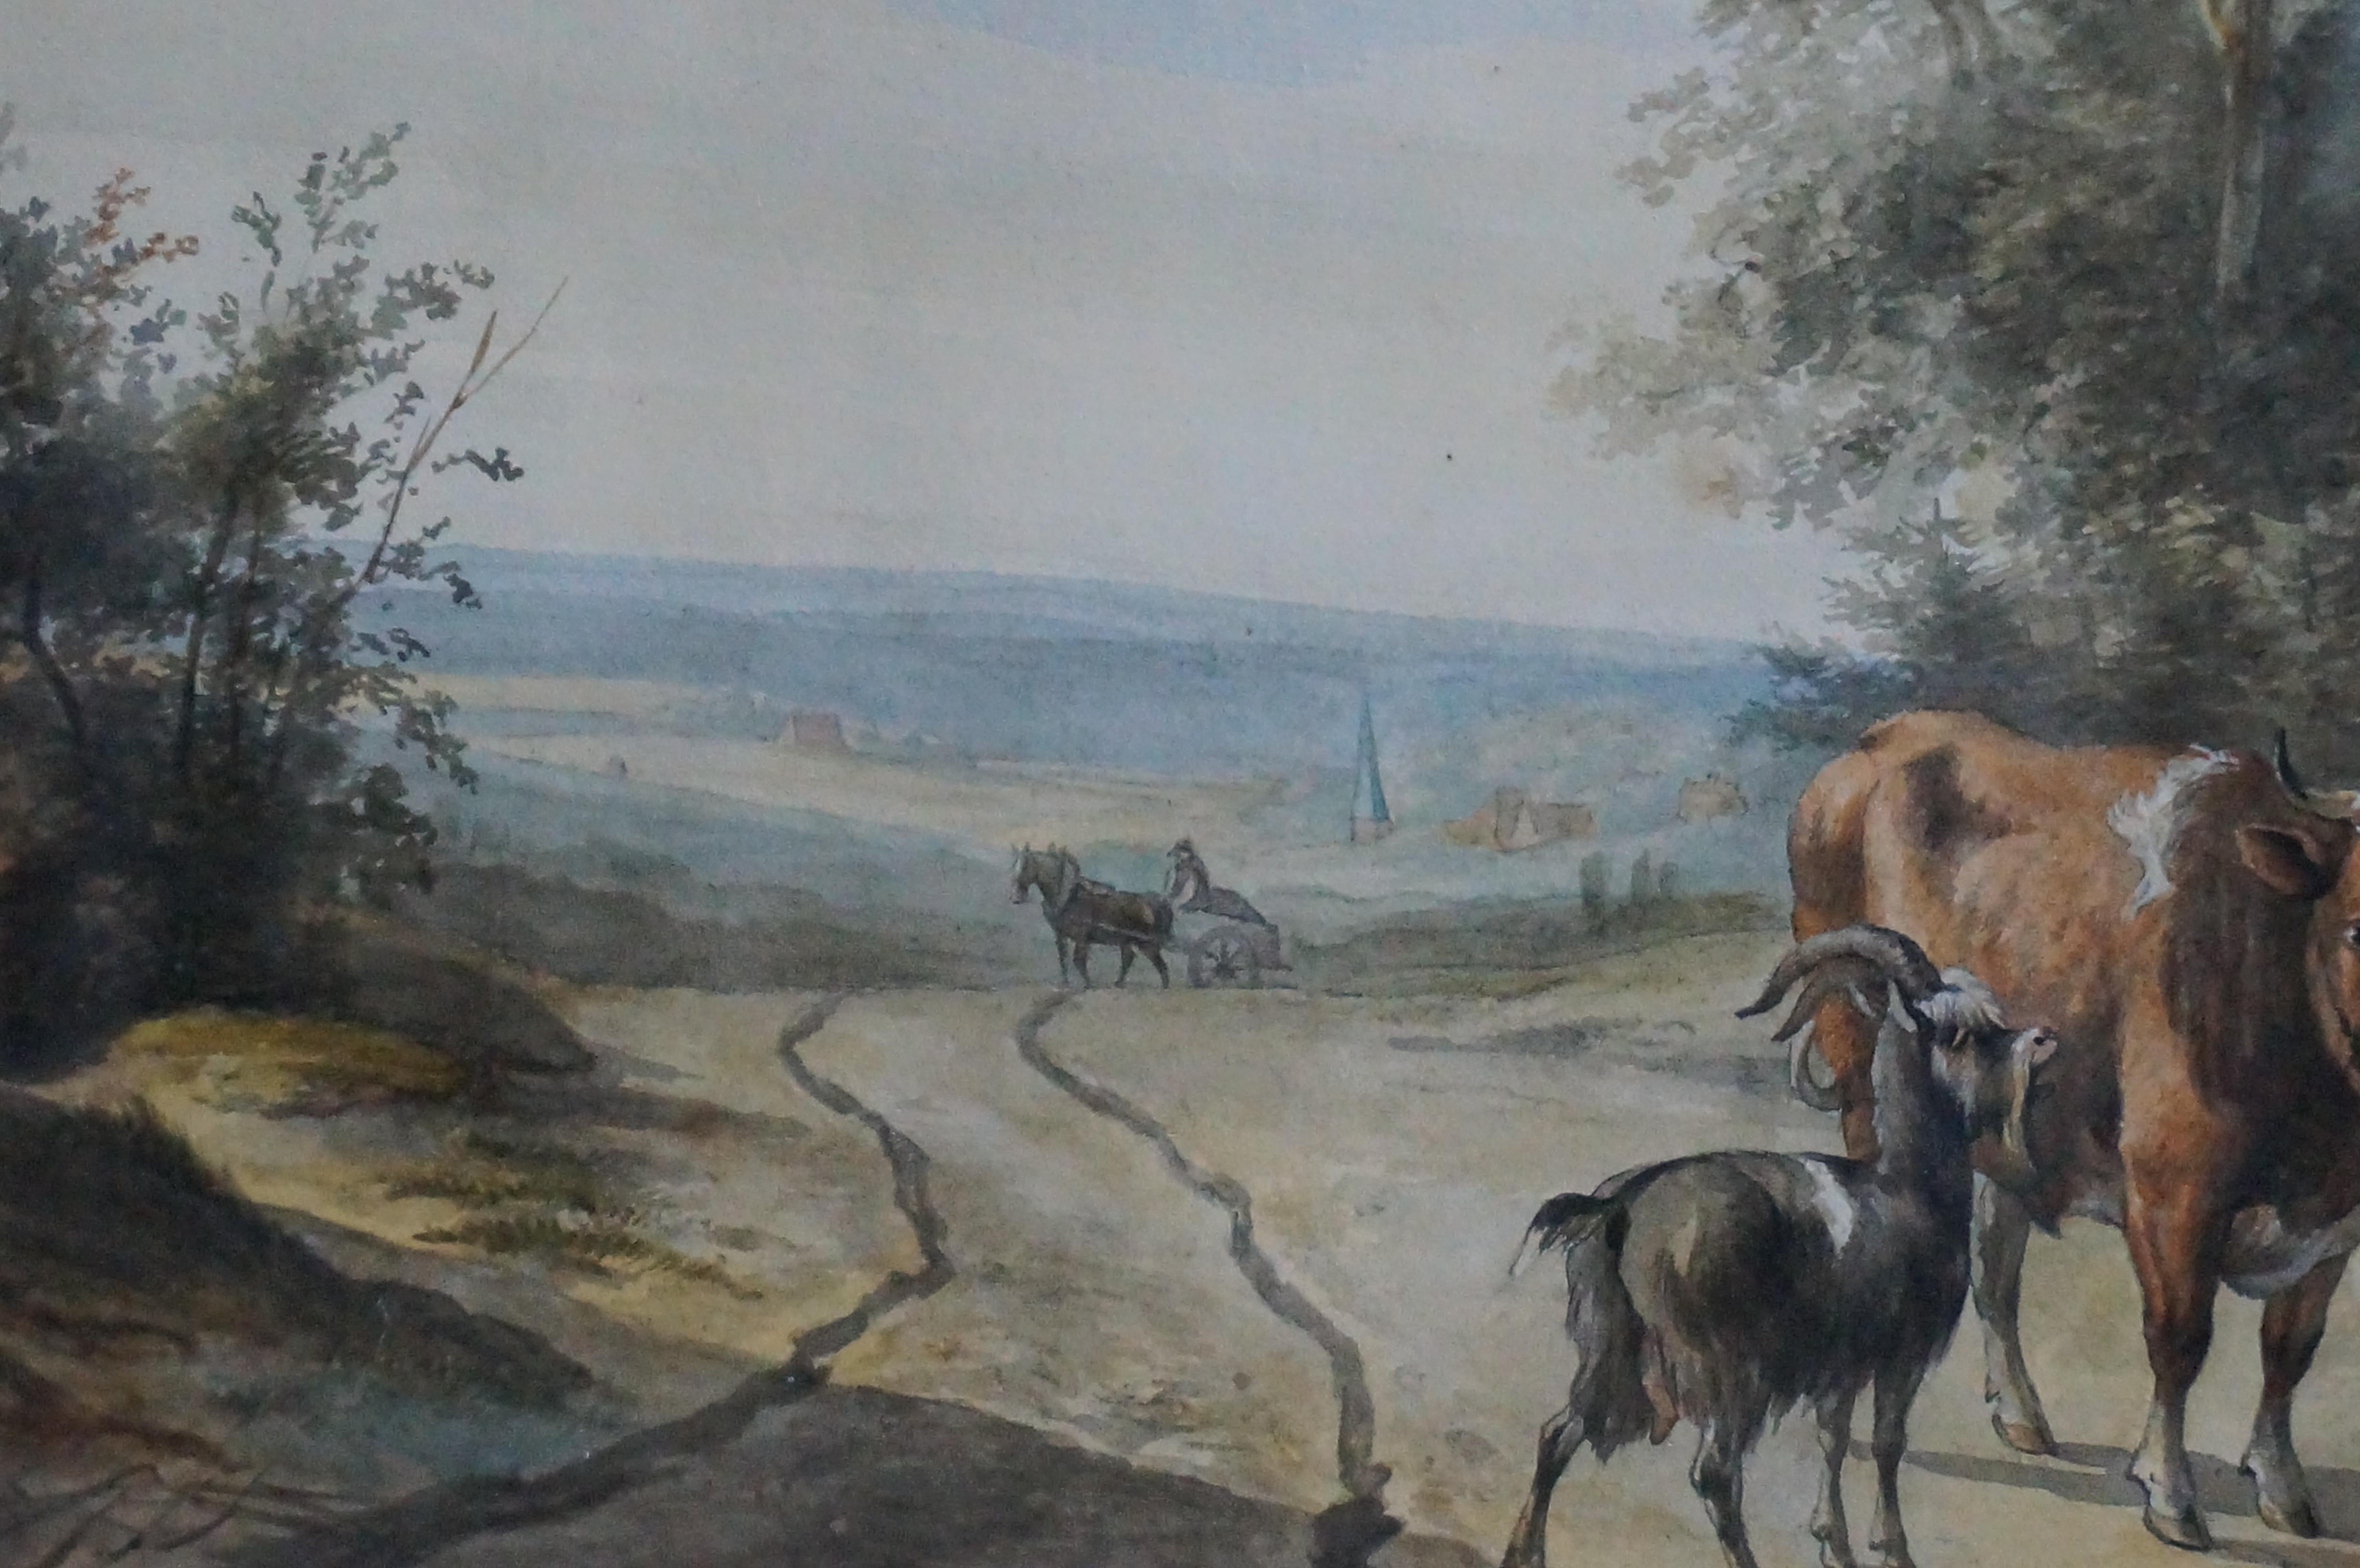 This beautifully excecuted landscape with cattle in watercolor was made by Abraham Hendrik Winter (1800-1861). Winter was born in Utrecht (the Netherlands) in 1800 and was a teacher at the National Vetenary school. From around 1820, the National